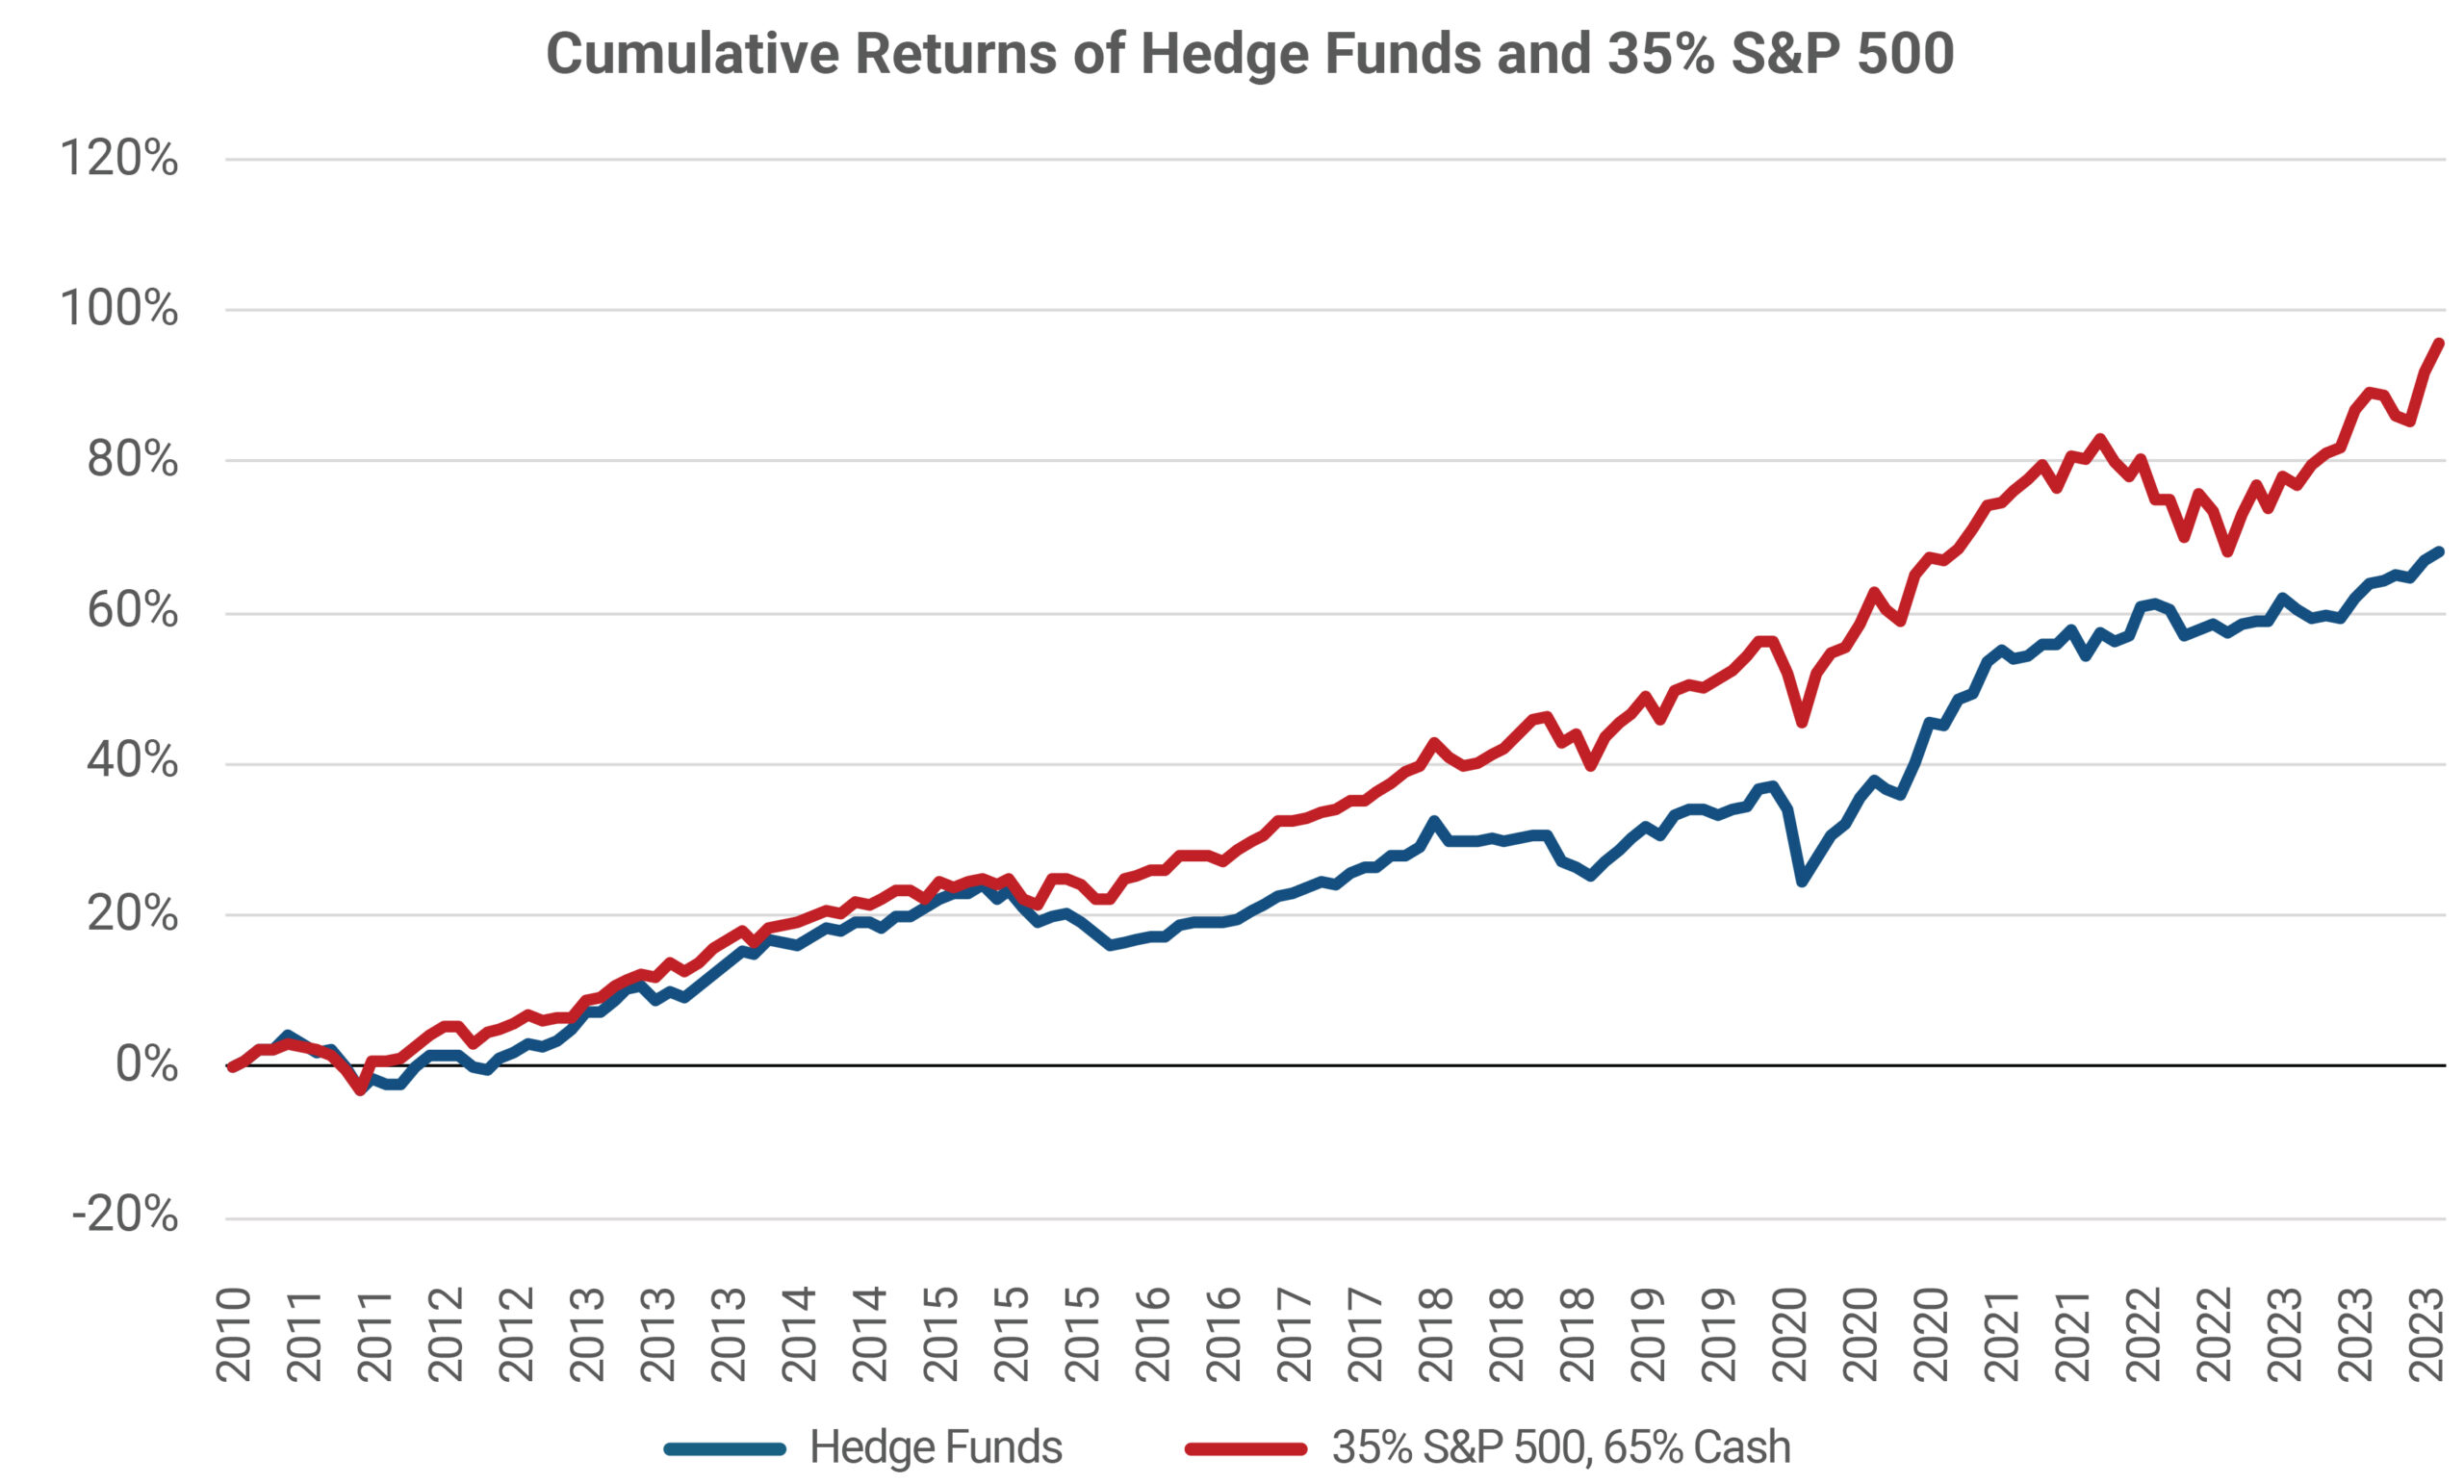 Cumulative Returns of Hedge Funds and 35% S&P 500